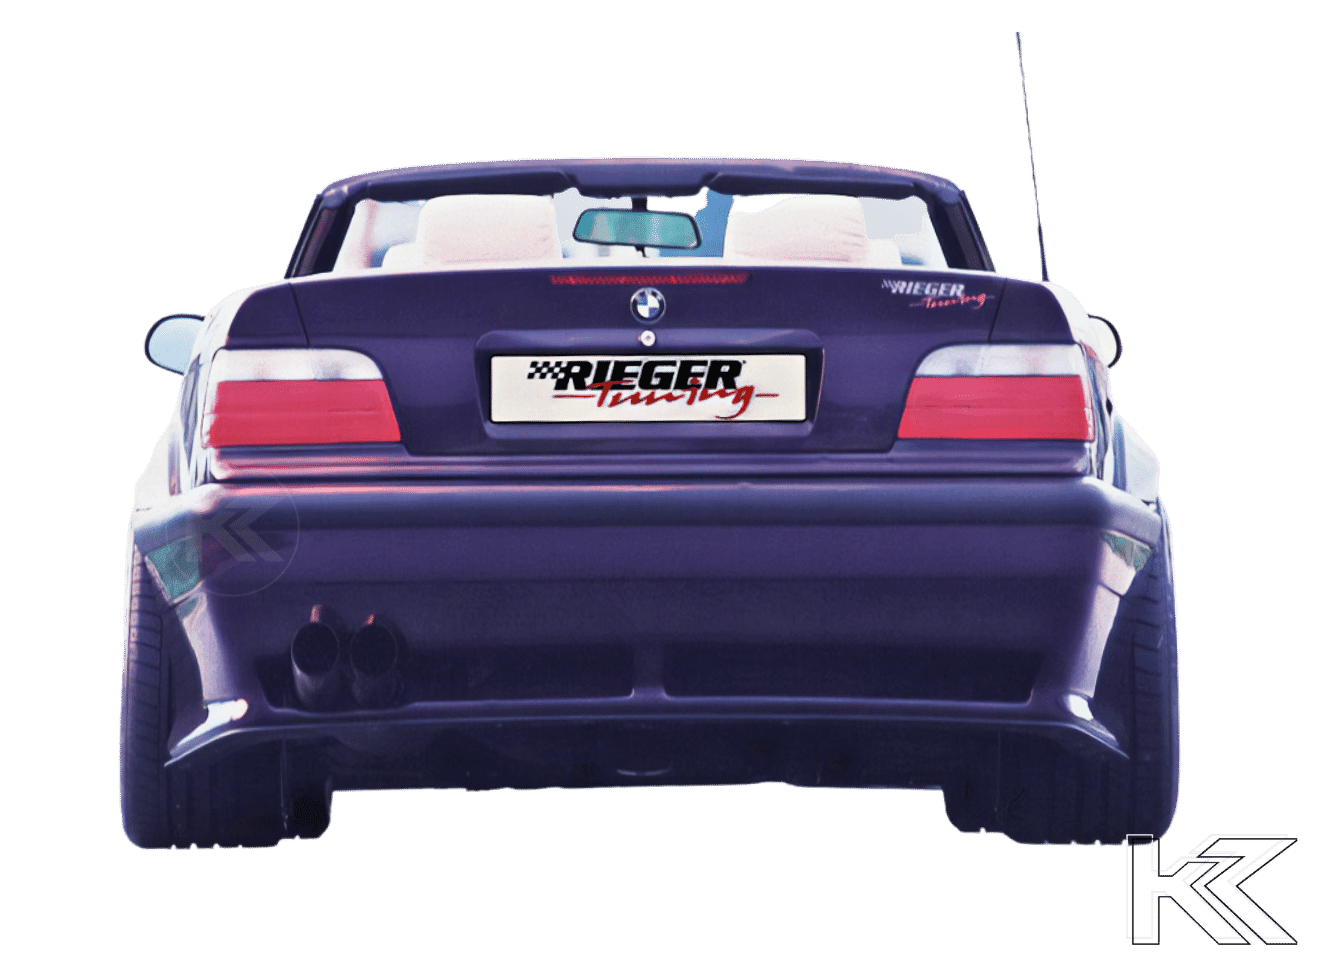 Rieger BMW E36 Vented Rear Bumper for Widebody - K2 Industries